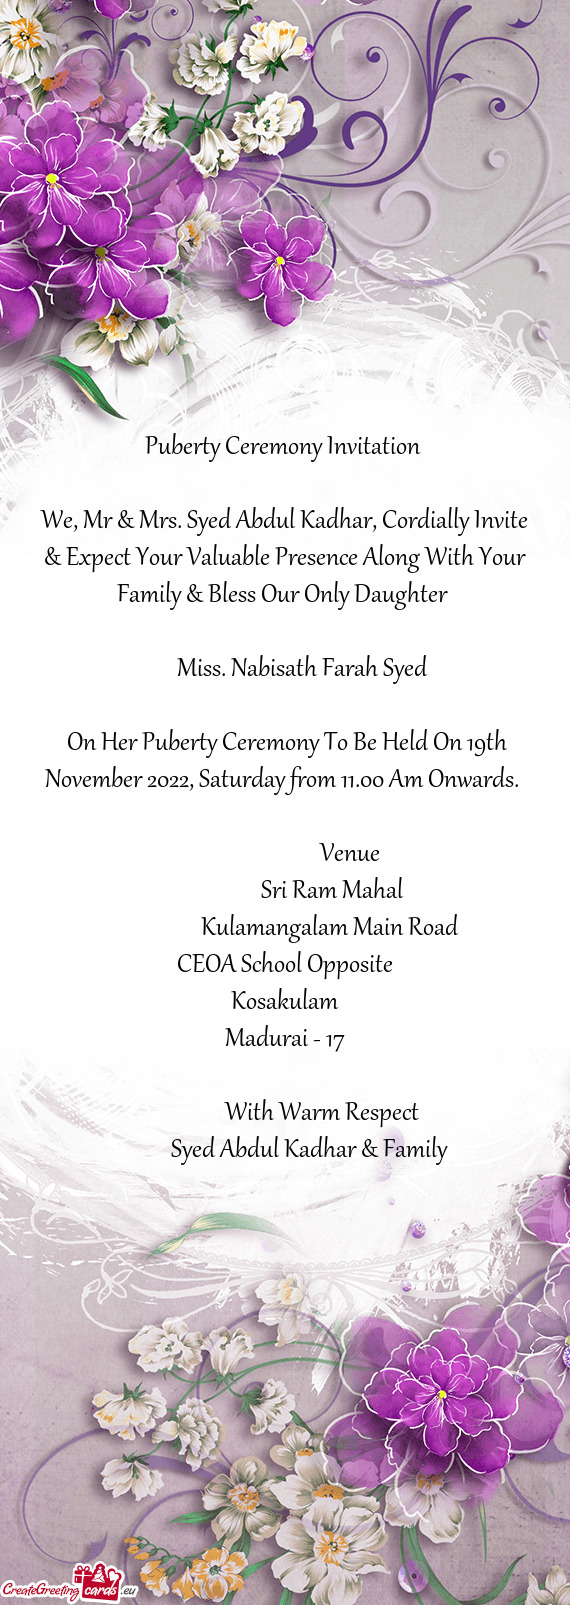 We, Mr & Mrs. Syed Abdul Kadhar, Cordially Invite & Expect Your Valuable Presence Along With Your Fa